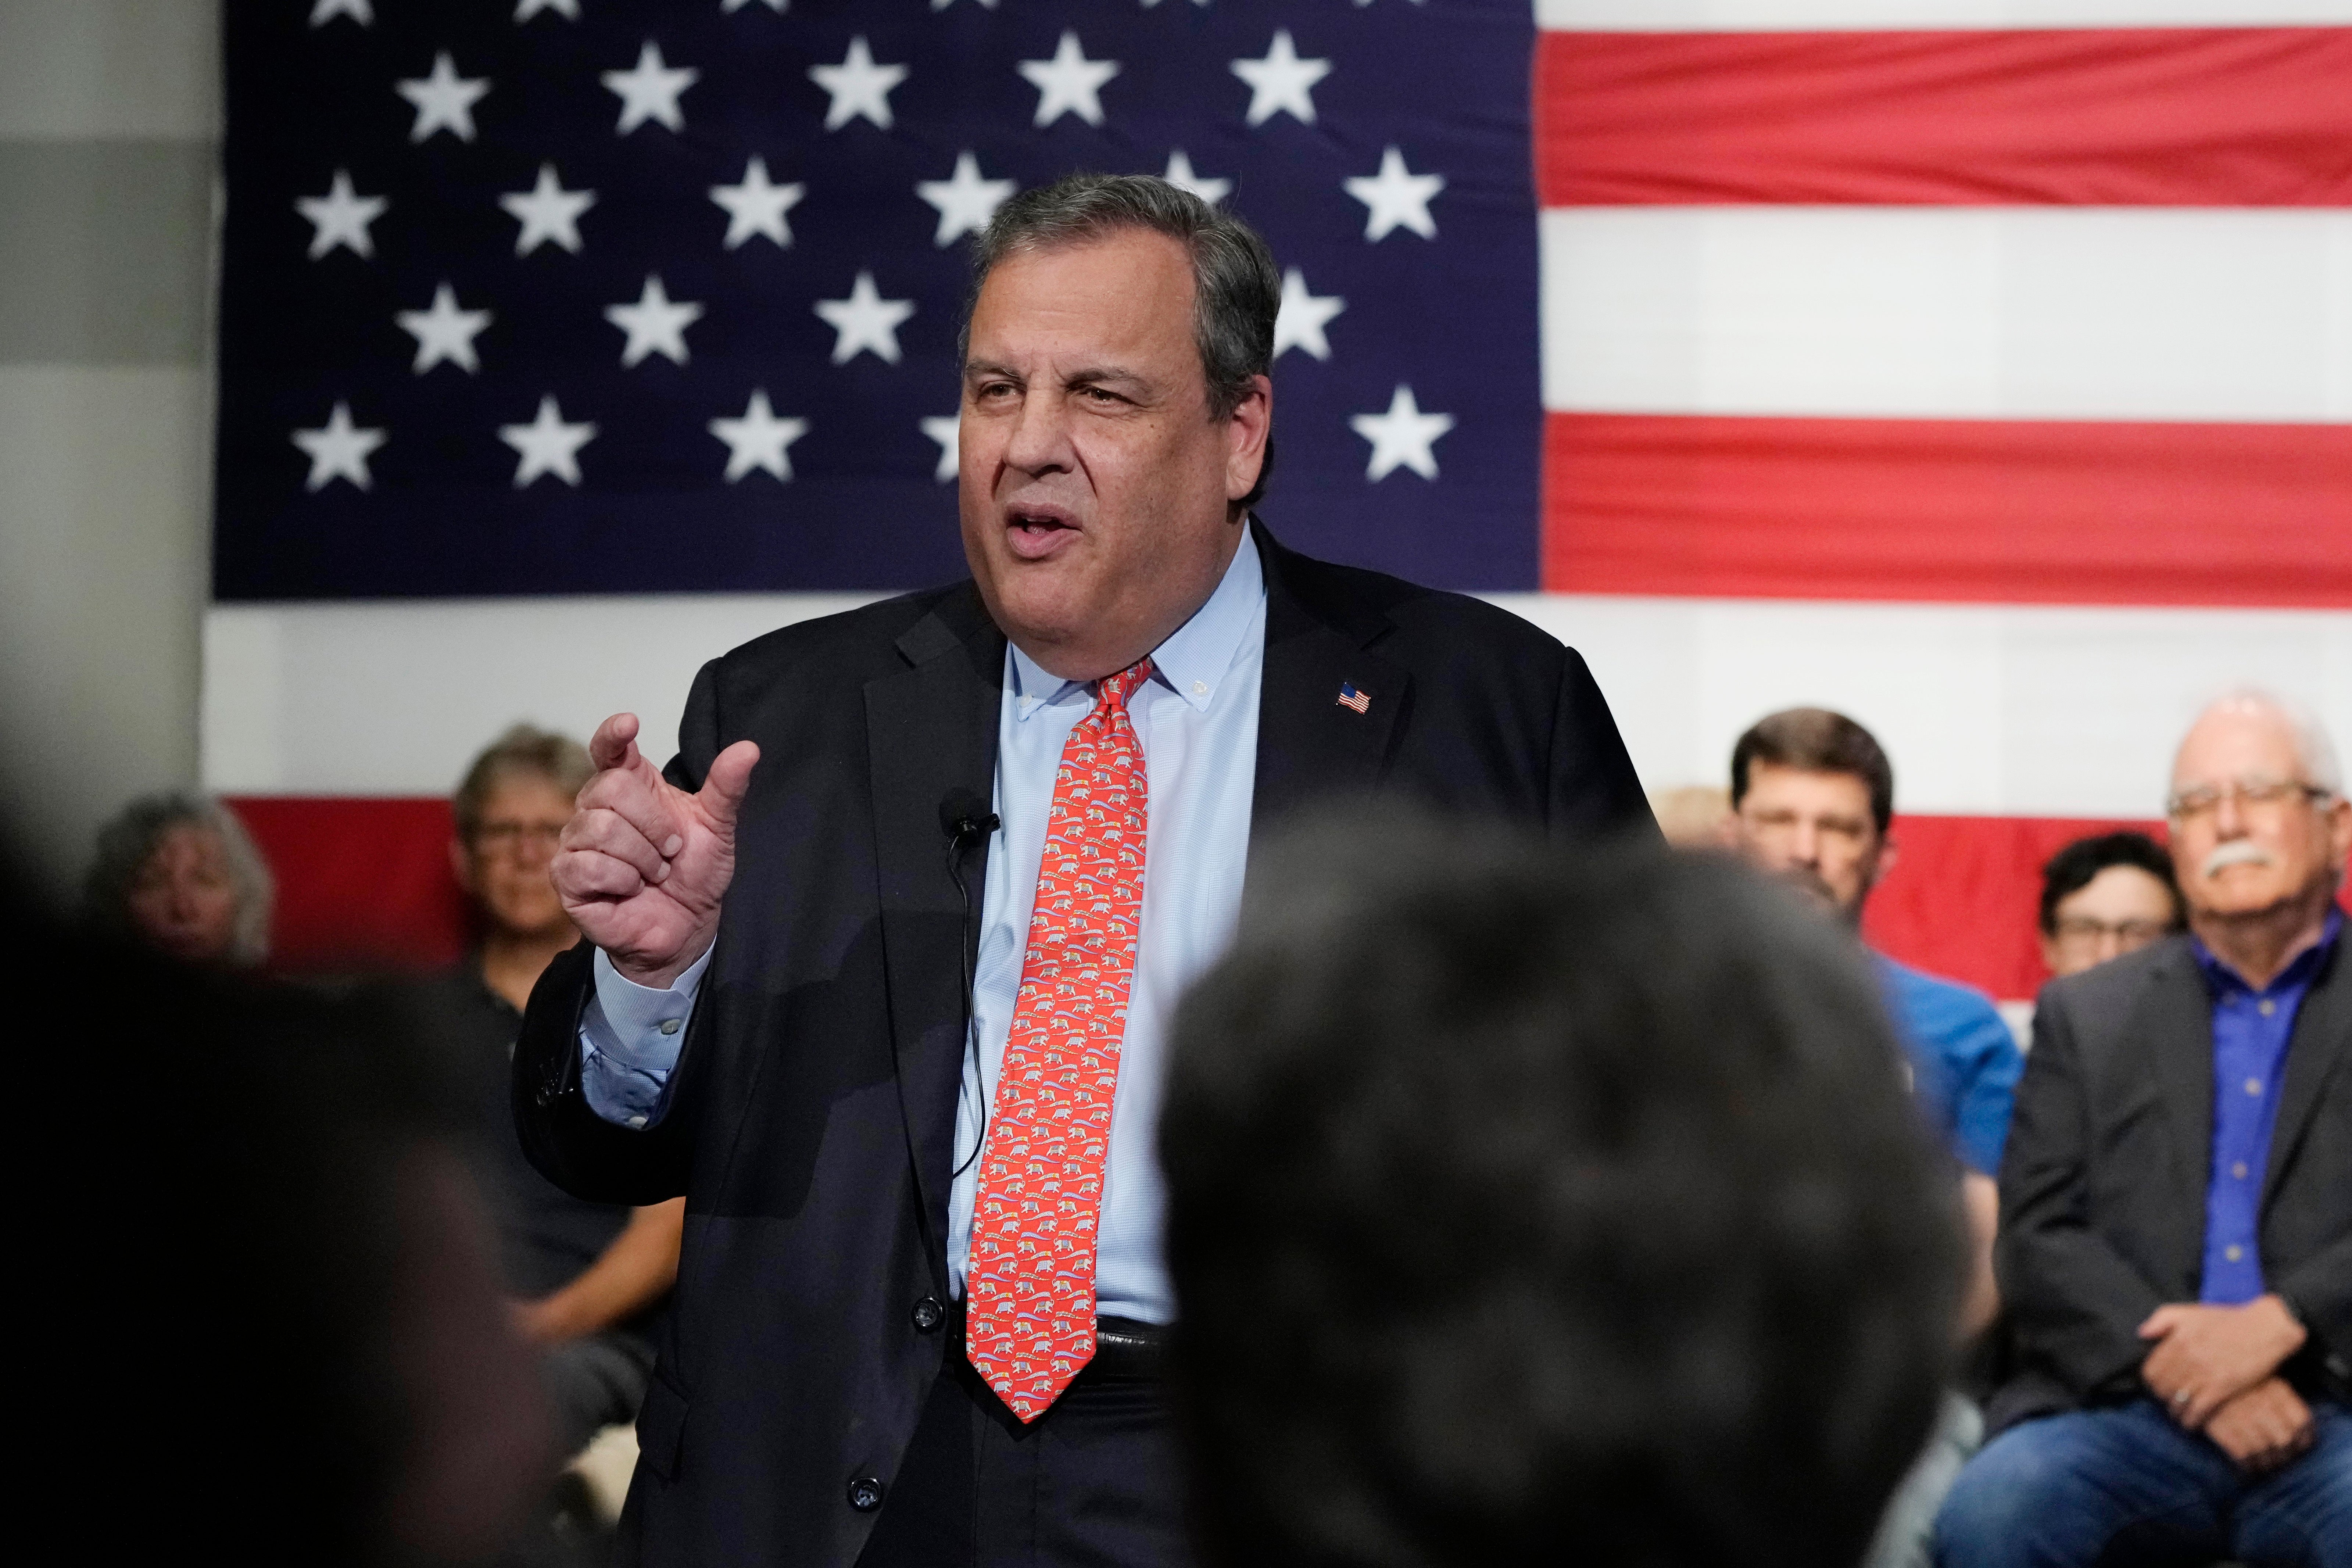 The former New Jersey governor did not hold back in his criticism of his former ally